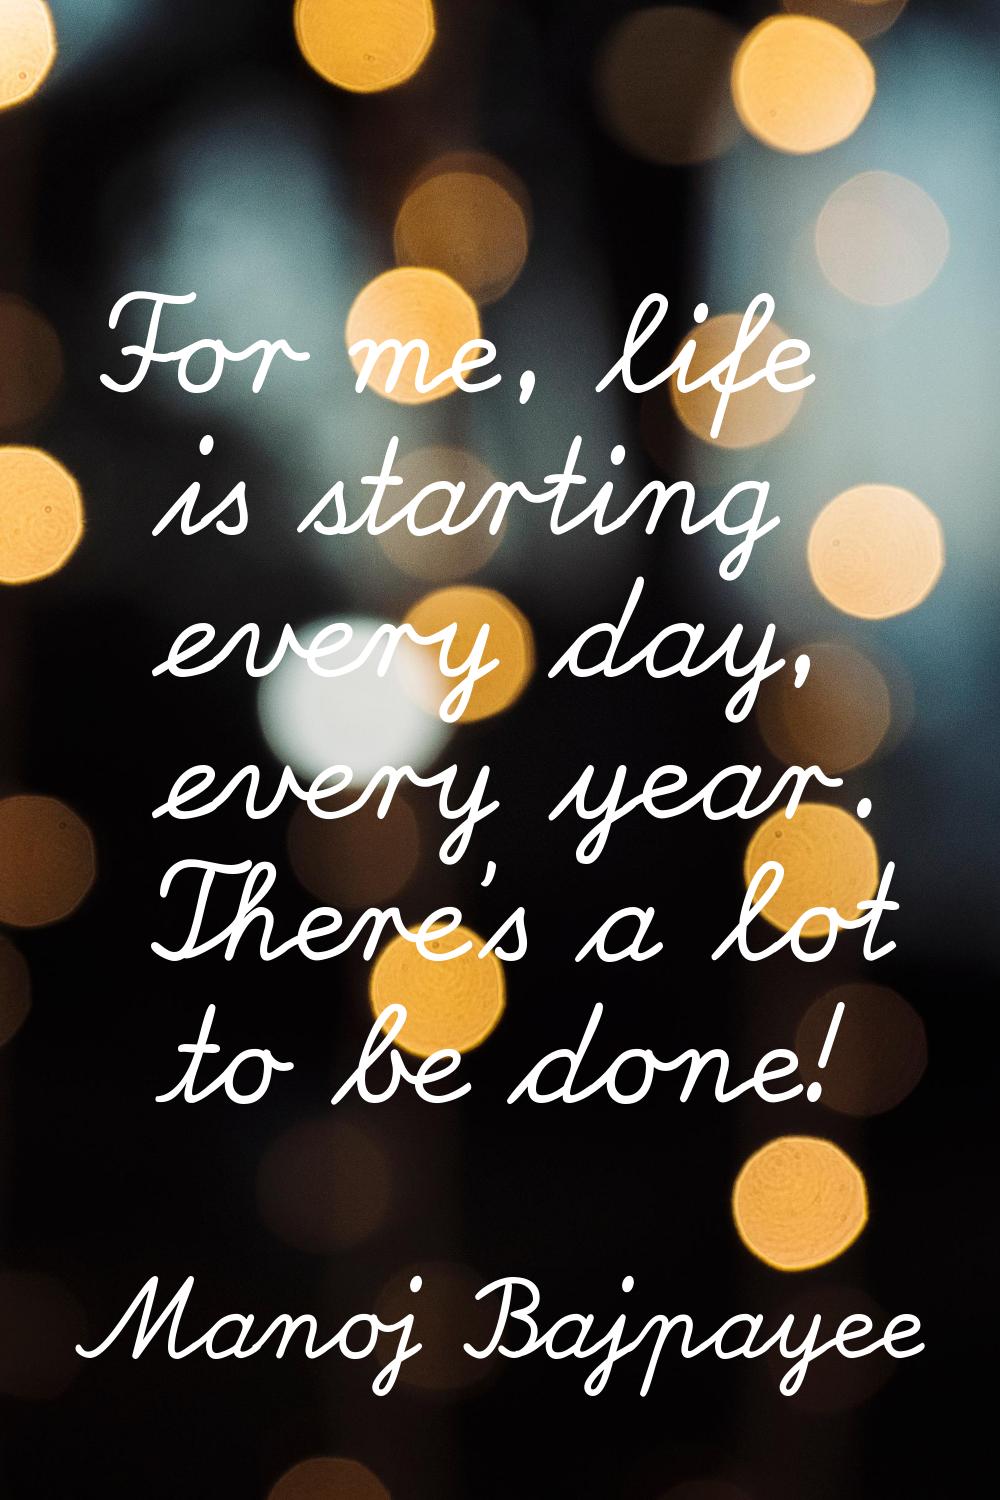 For me, life is starting every day, every year. There's a lot to be done!